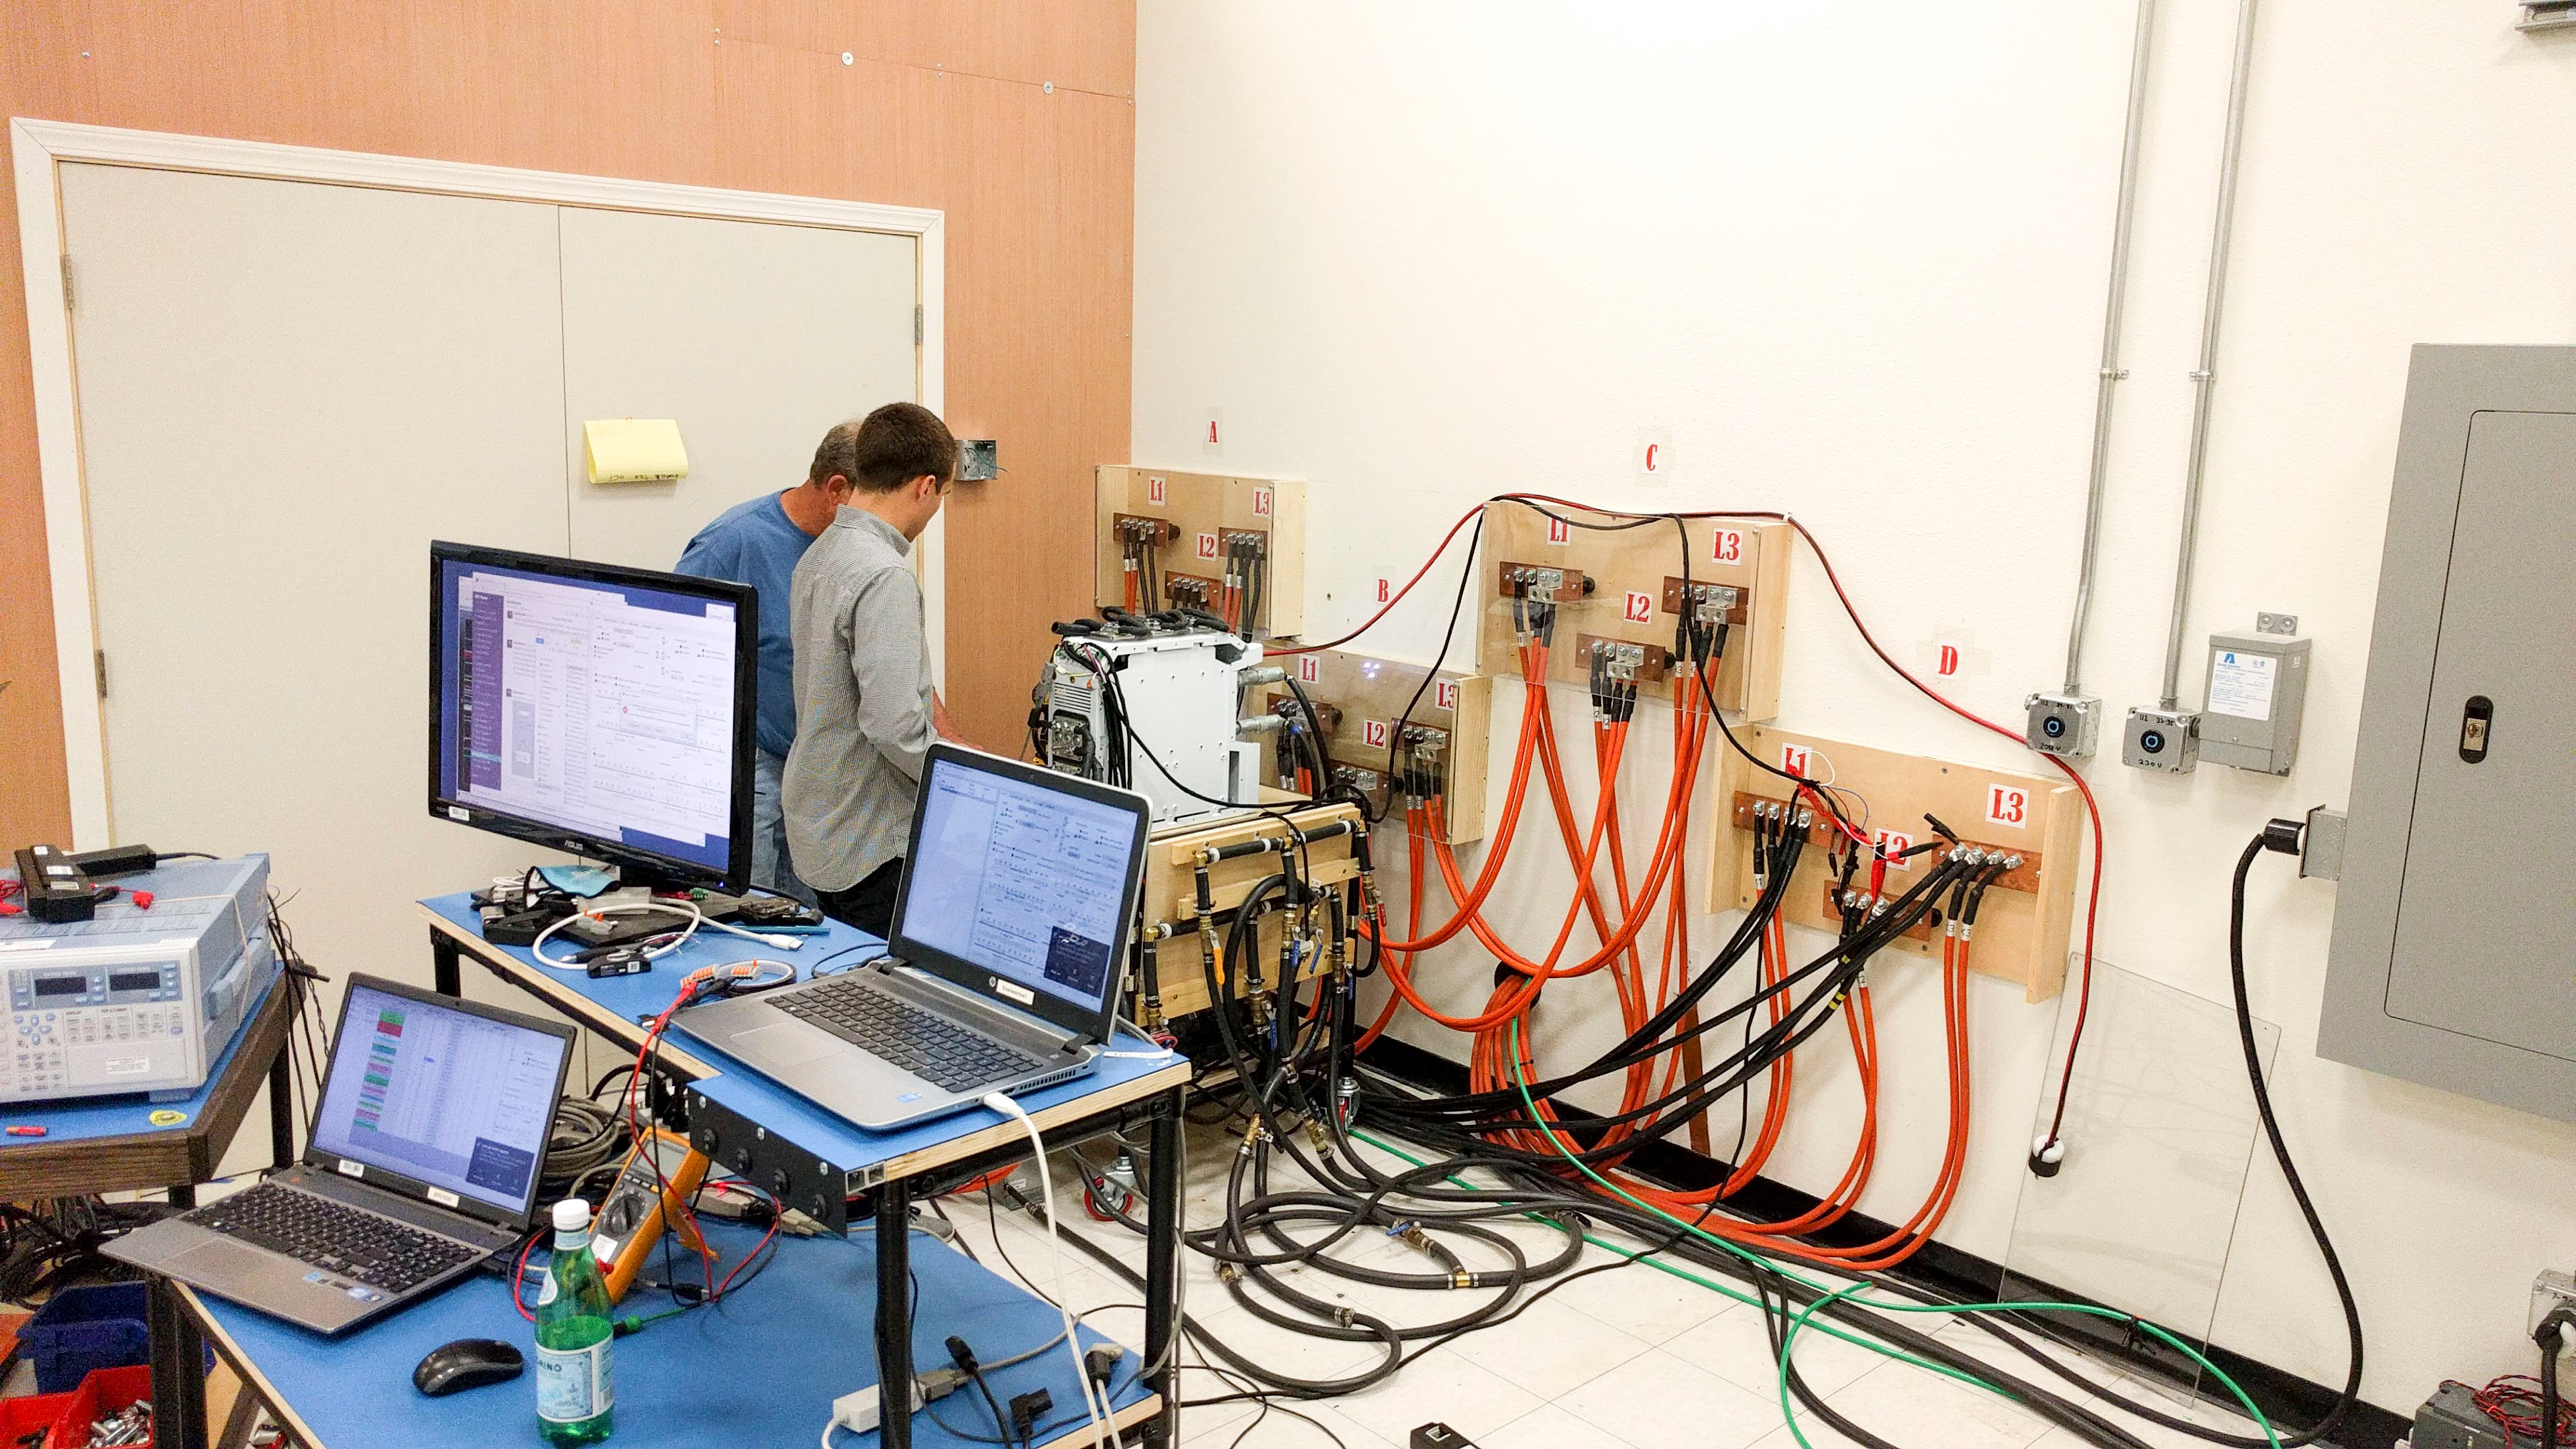 EPC Power testing controllers at full power lab